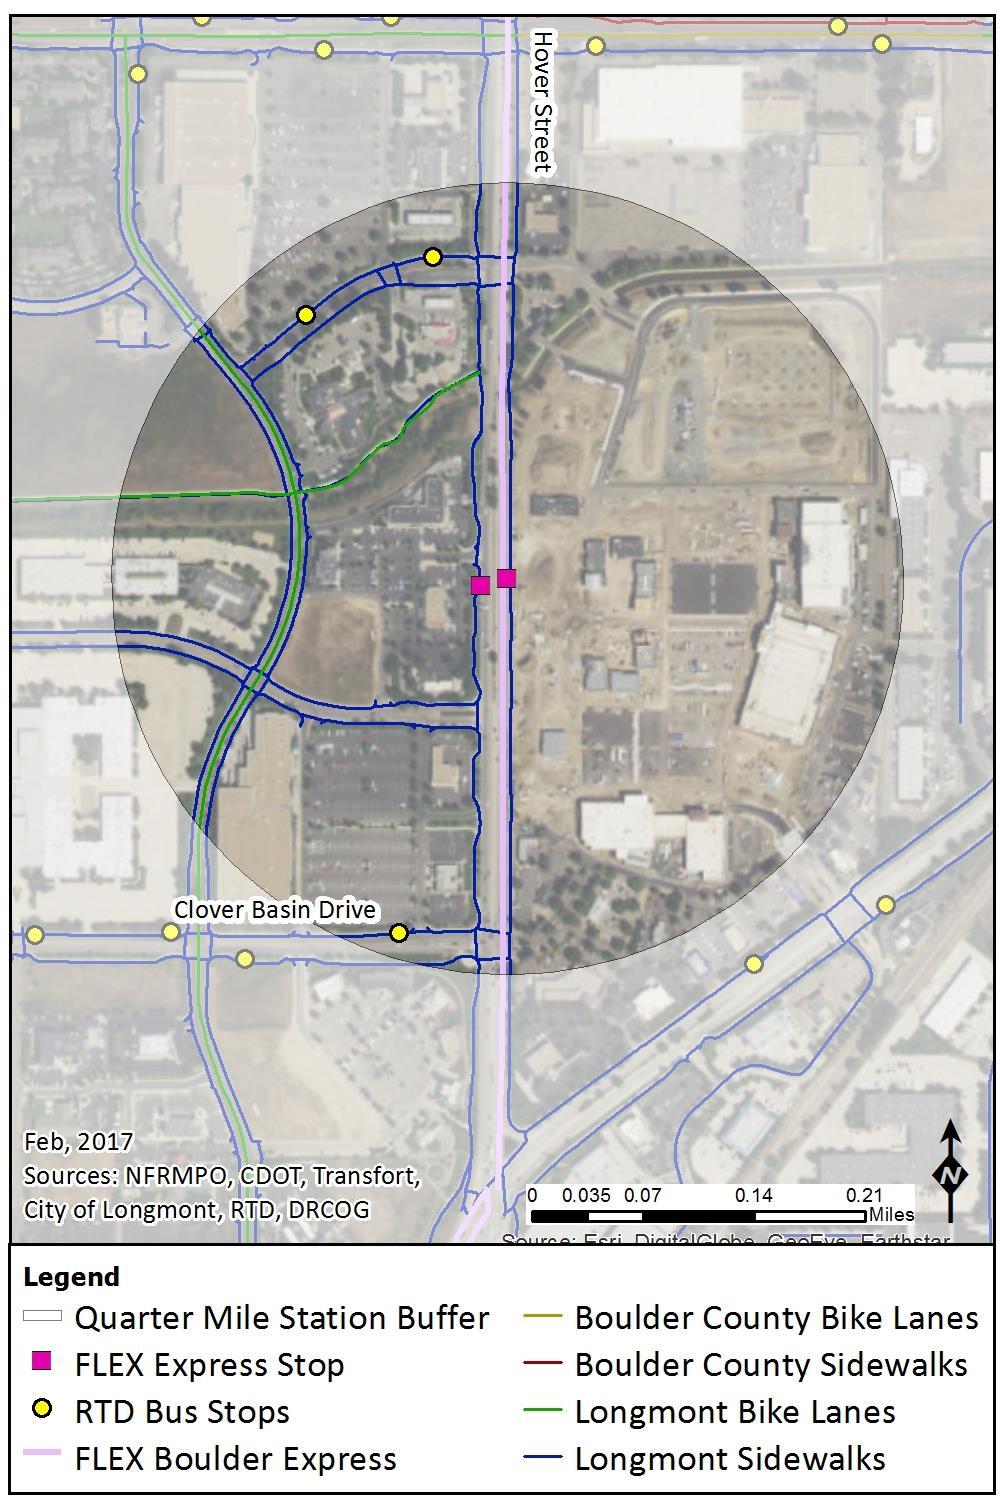 Figure 3-17 shows the non-motorized infrastructure near the Village at the Peaks Mall. The area around Village at the Peaks Mall is undergoing redevelopment.